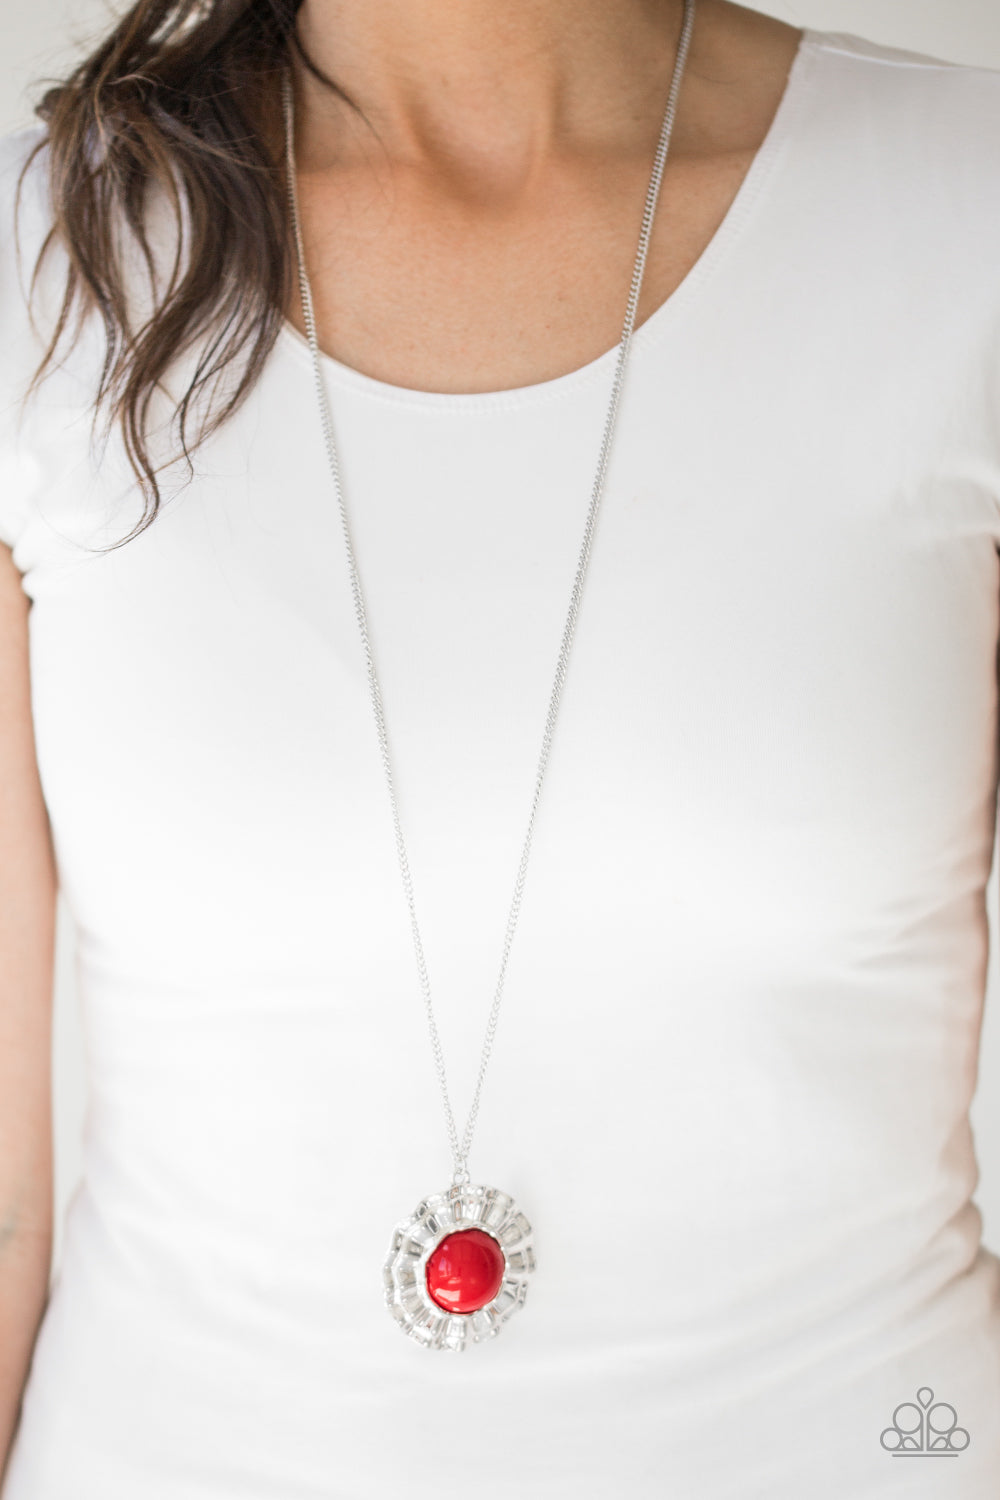 My Primary Color - red - Paparazzi necklace